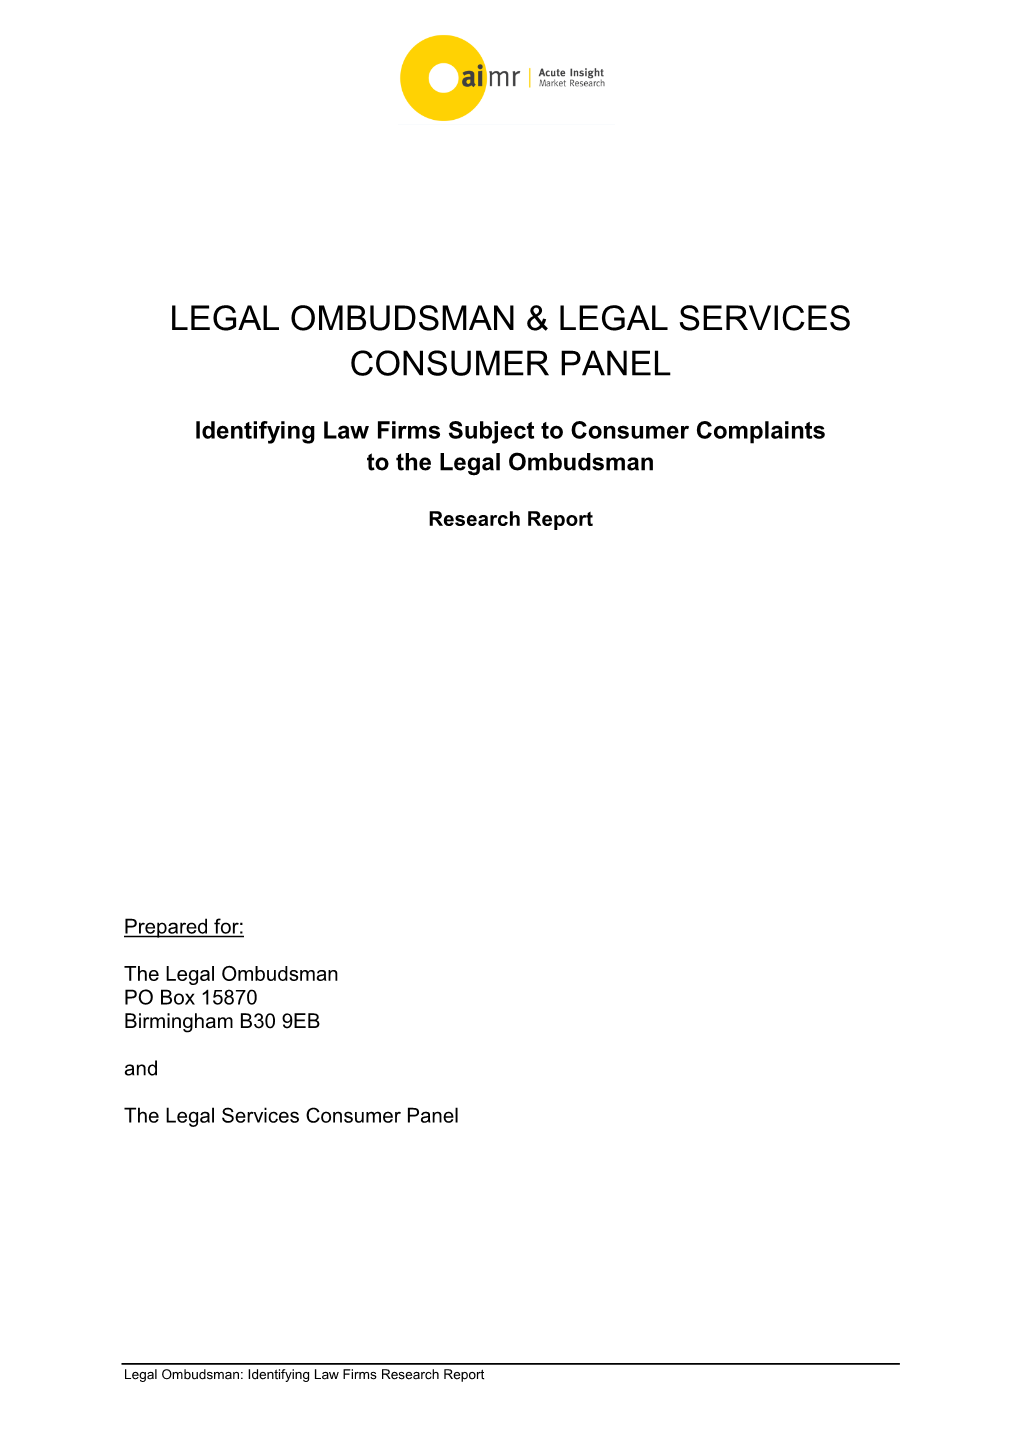 Identifying Law Firms Subject to Consumer Complaints to the Legal Ombudsman